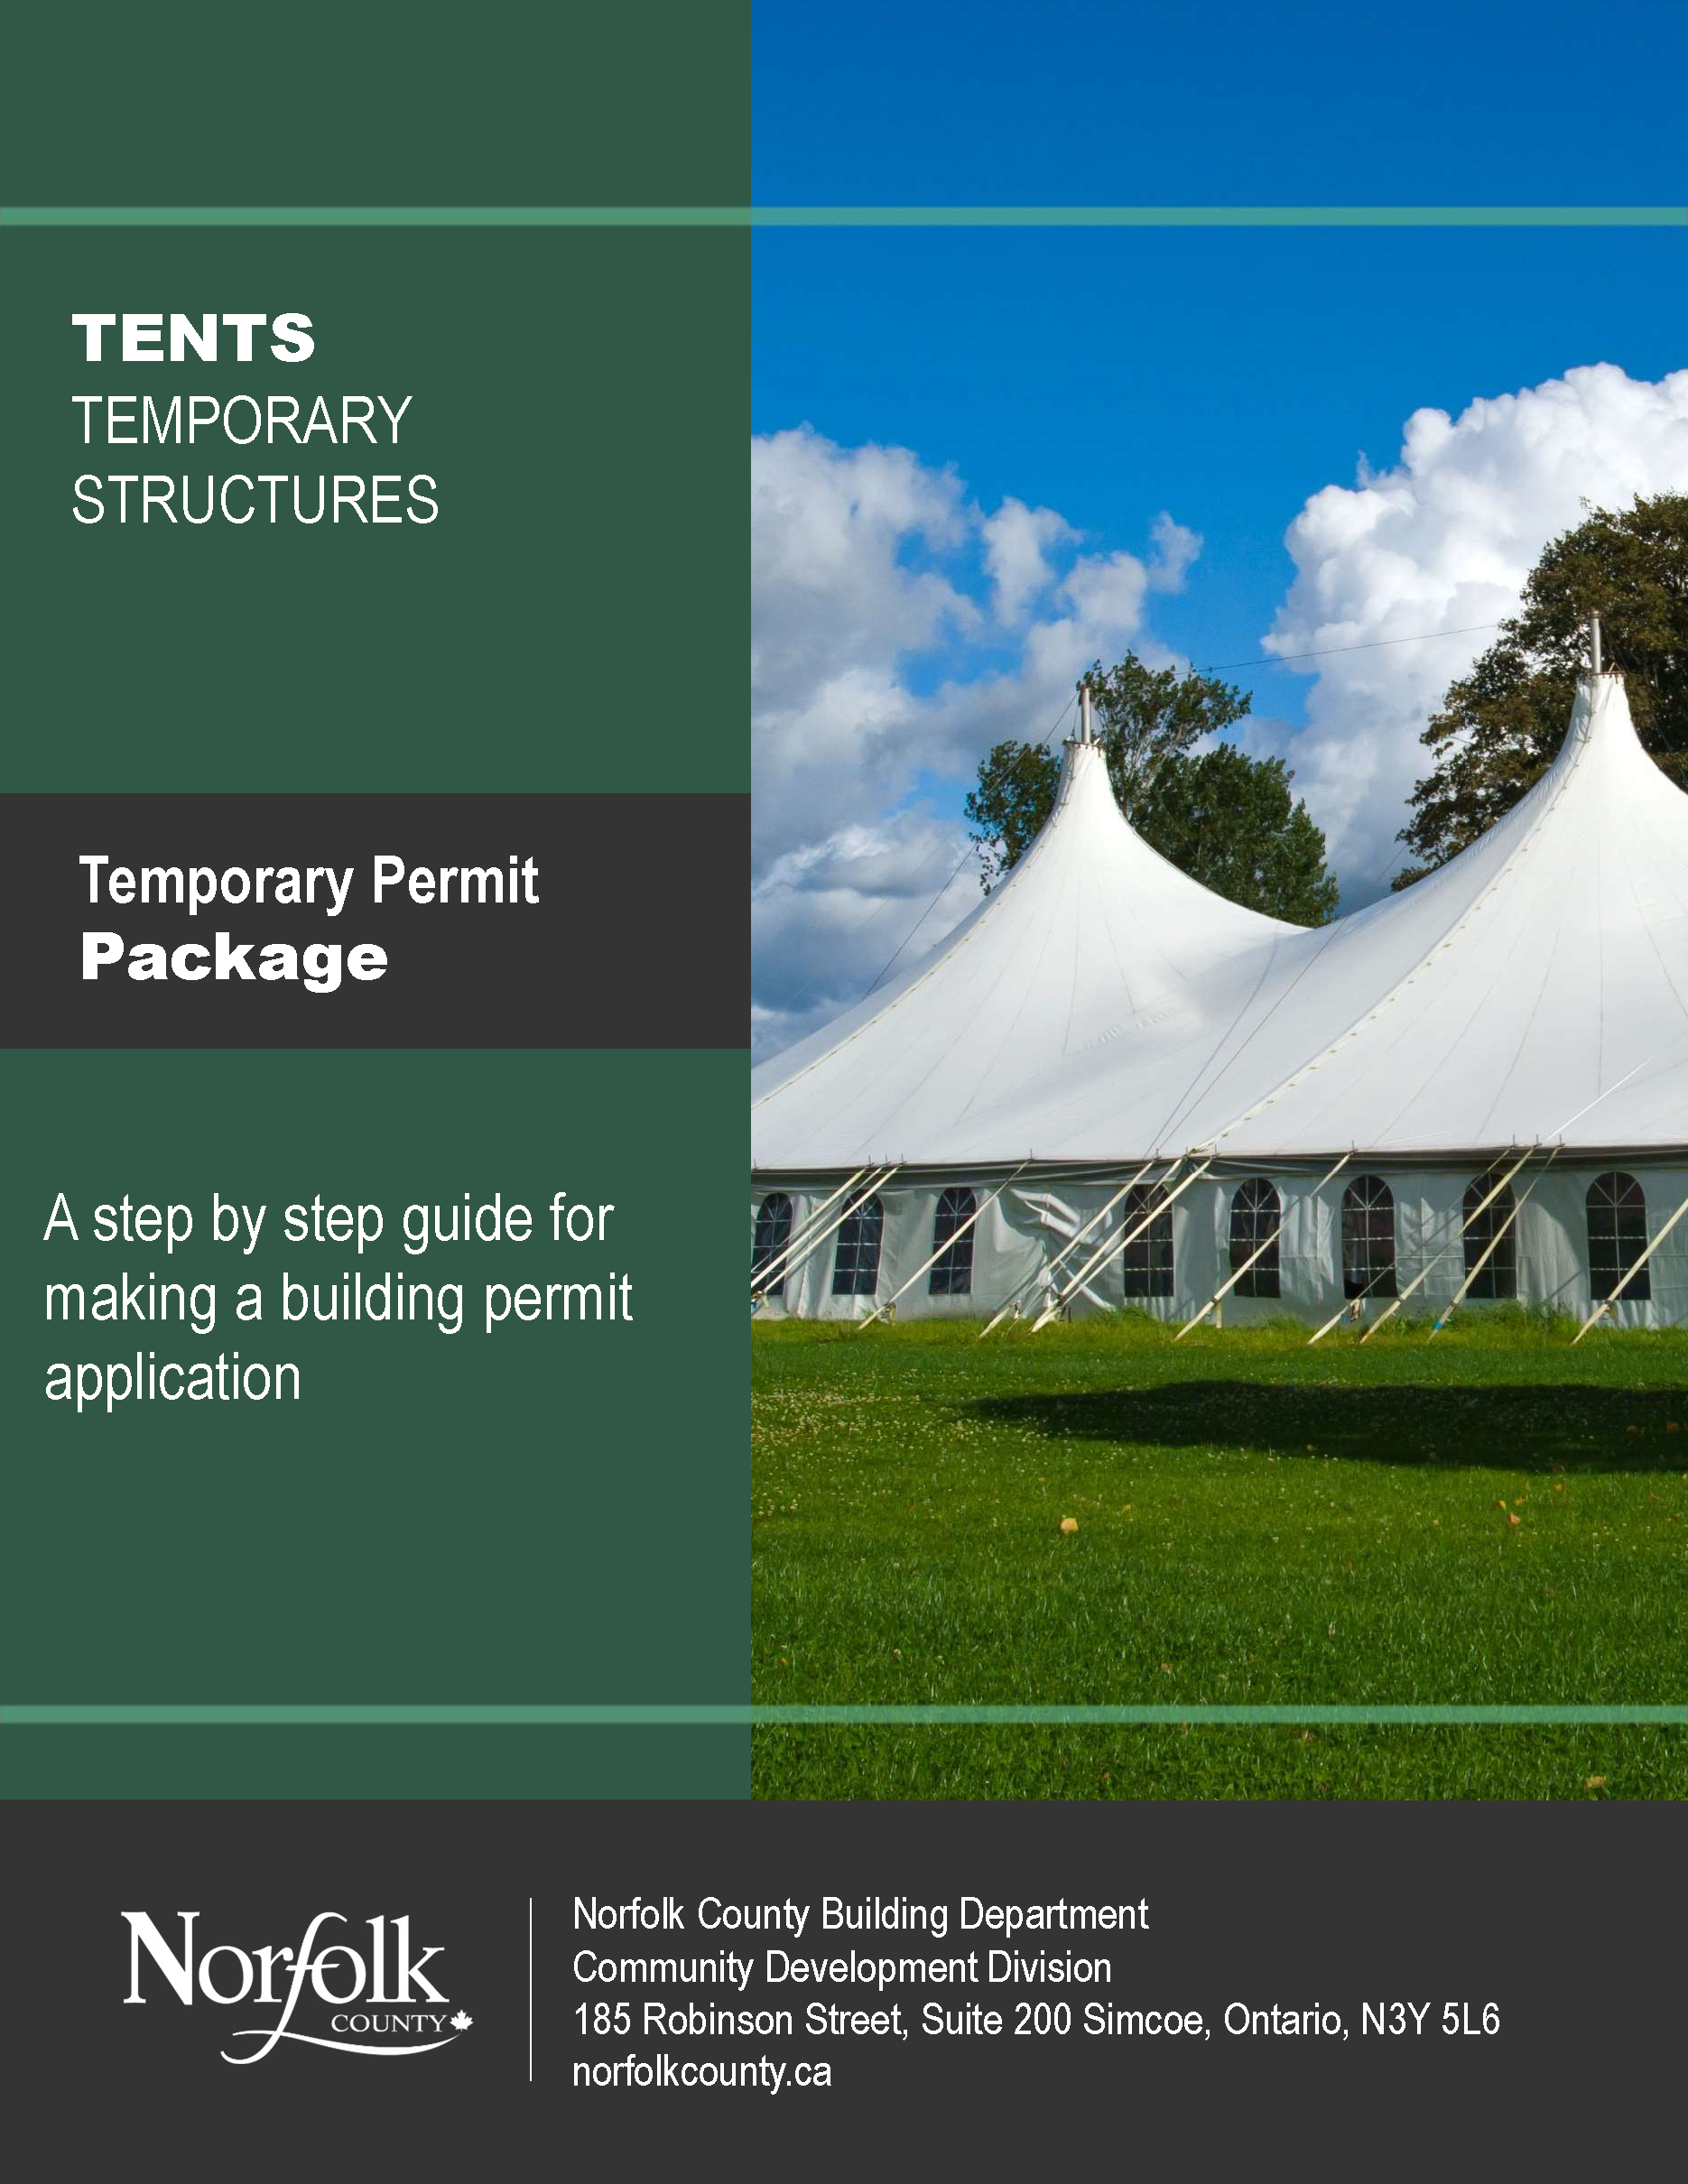 Tents and Temporary Structures